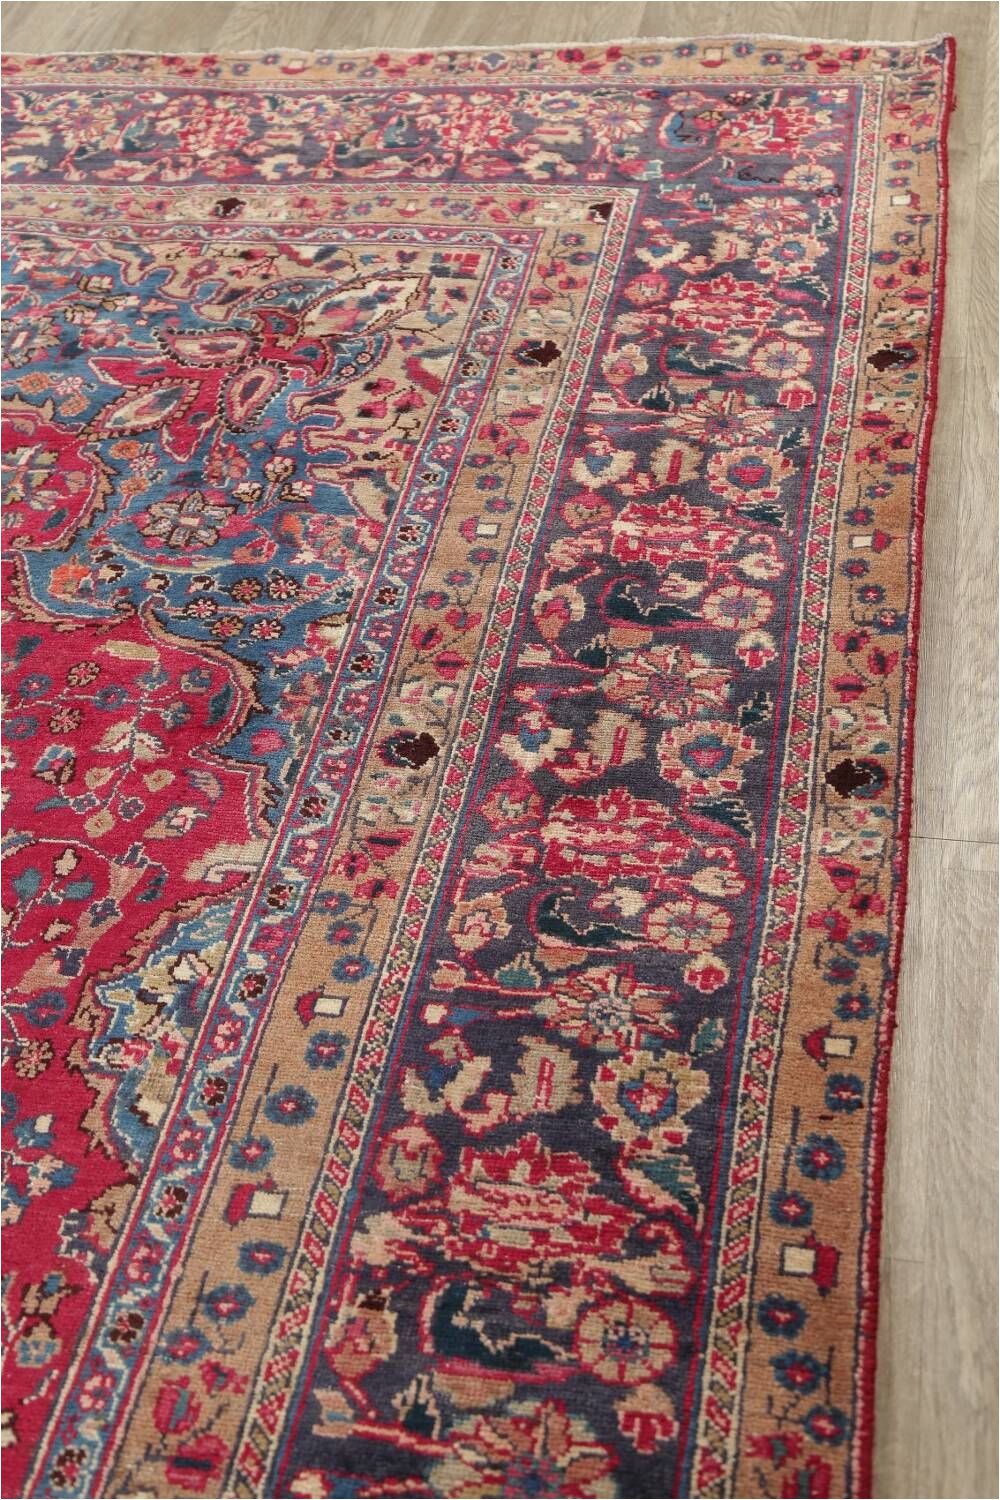 Vintage area Rugs 9 X 12 Vintage Floral Red Mashad Persian area Rug 9×12 In 2020